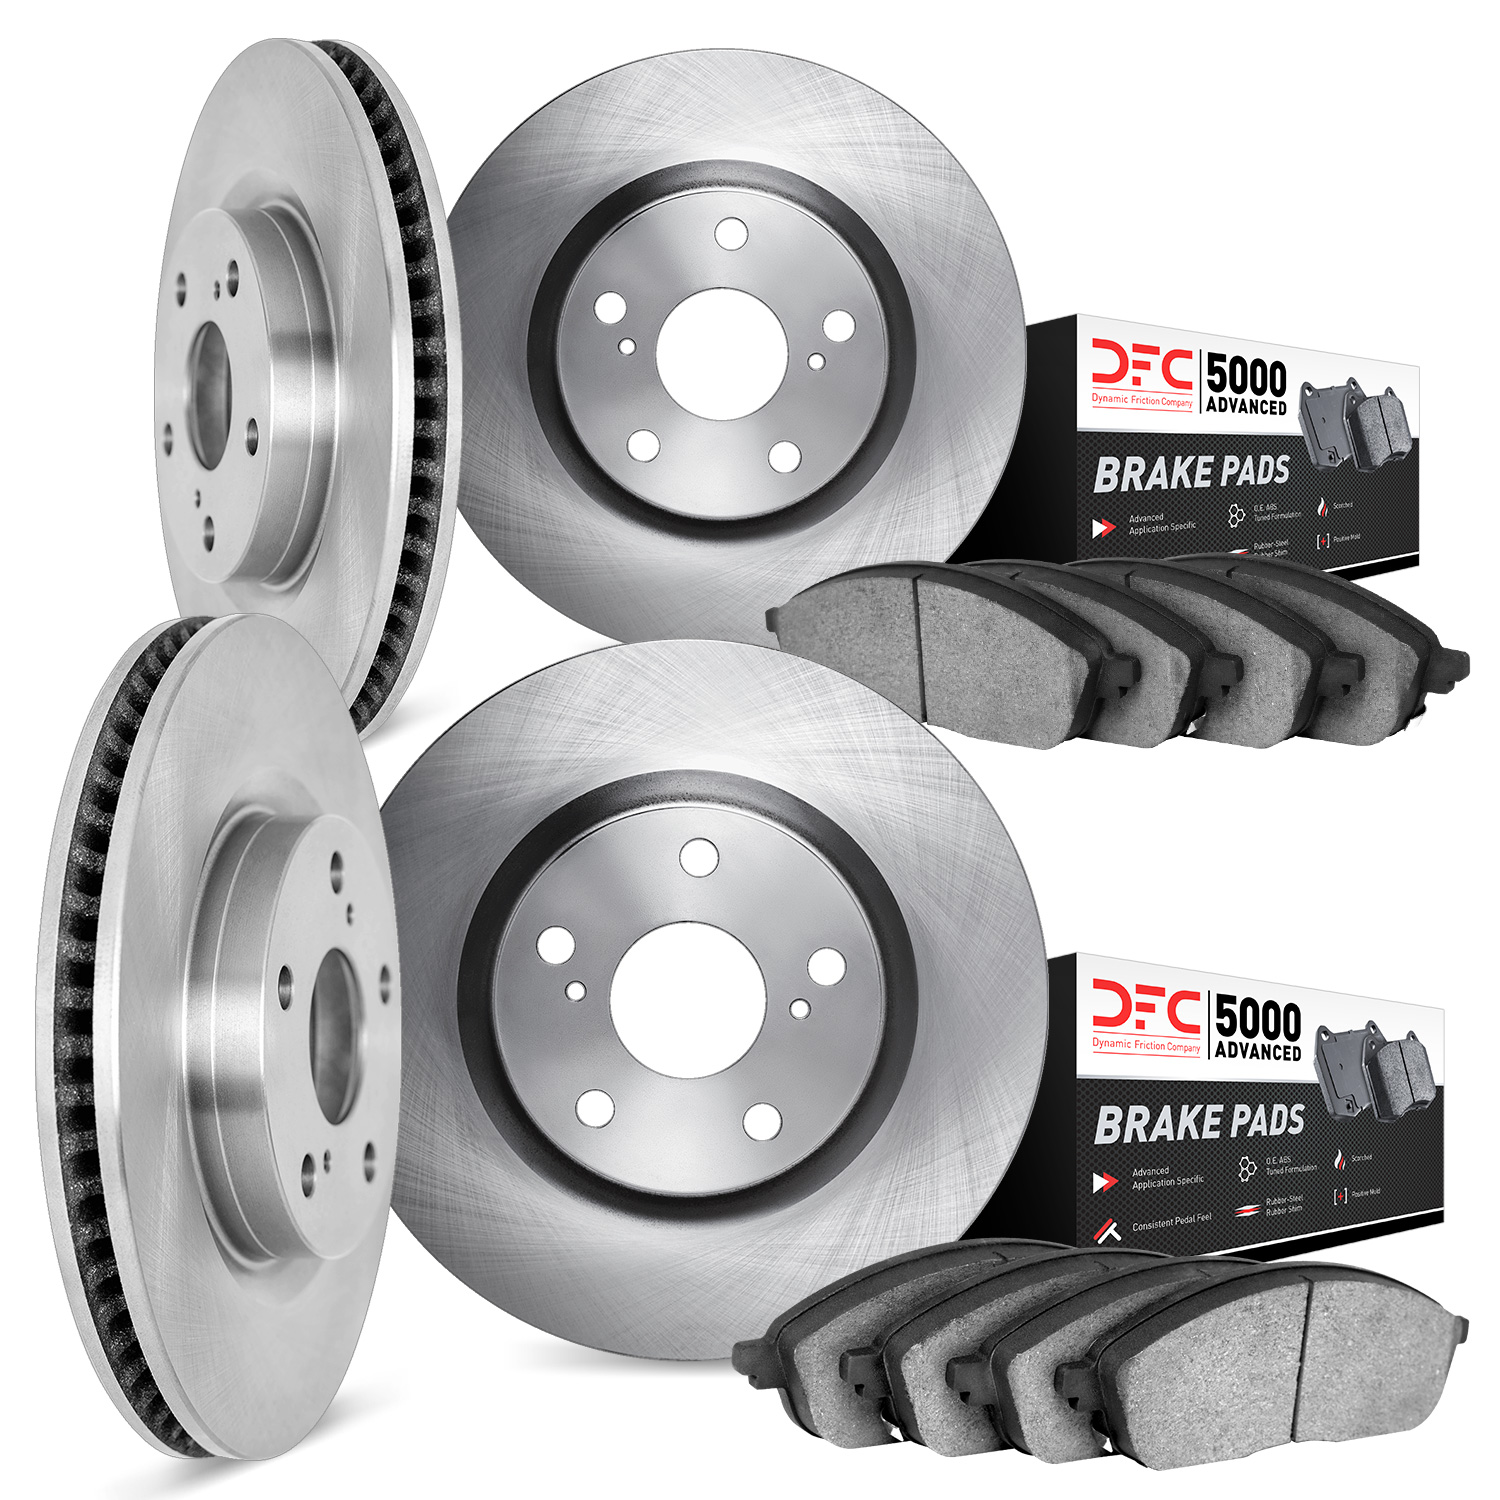 6504-31021 Brake Rotors w/5000 Advanced Brake Pads Kit, 2008-2010 BMW, Position: Front and Rear